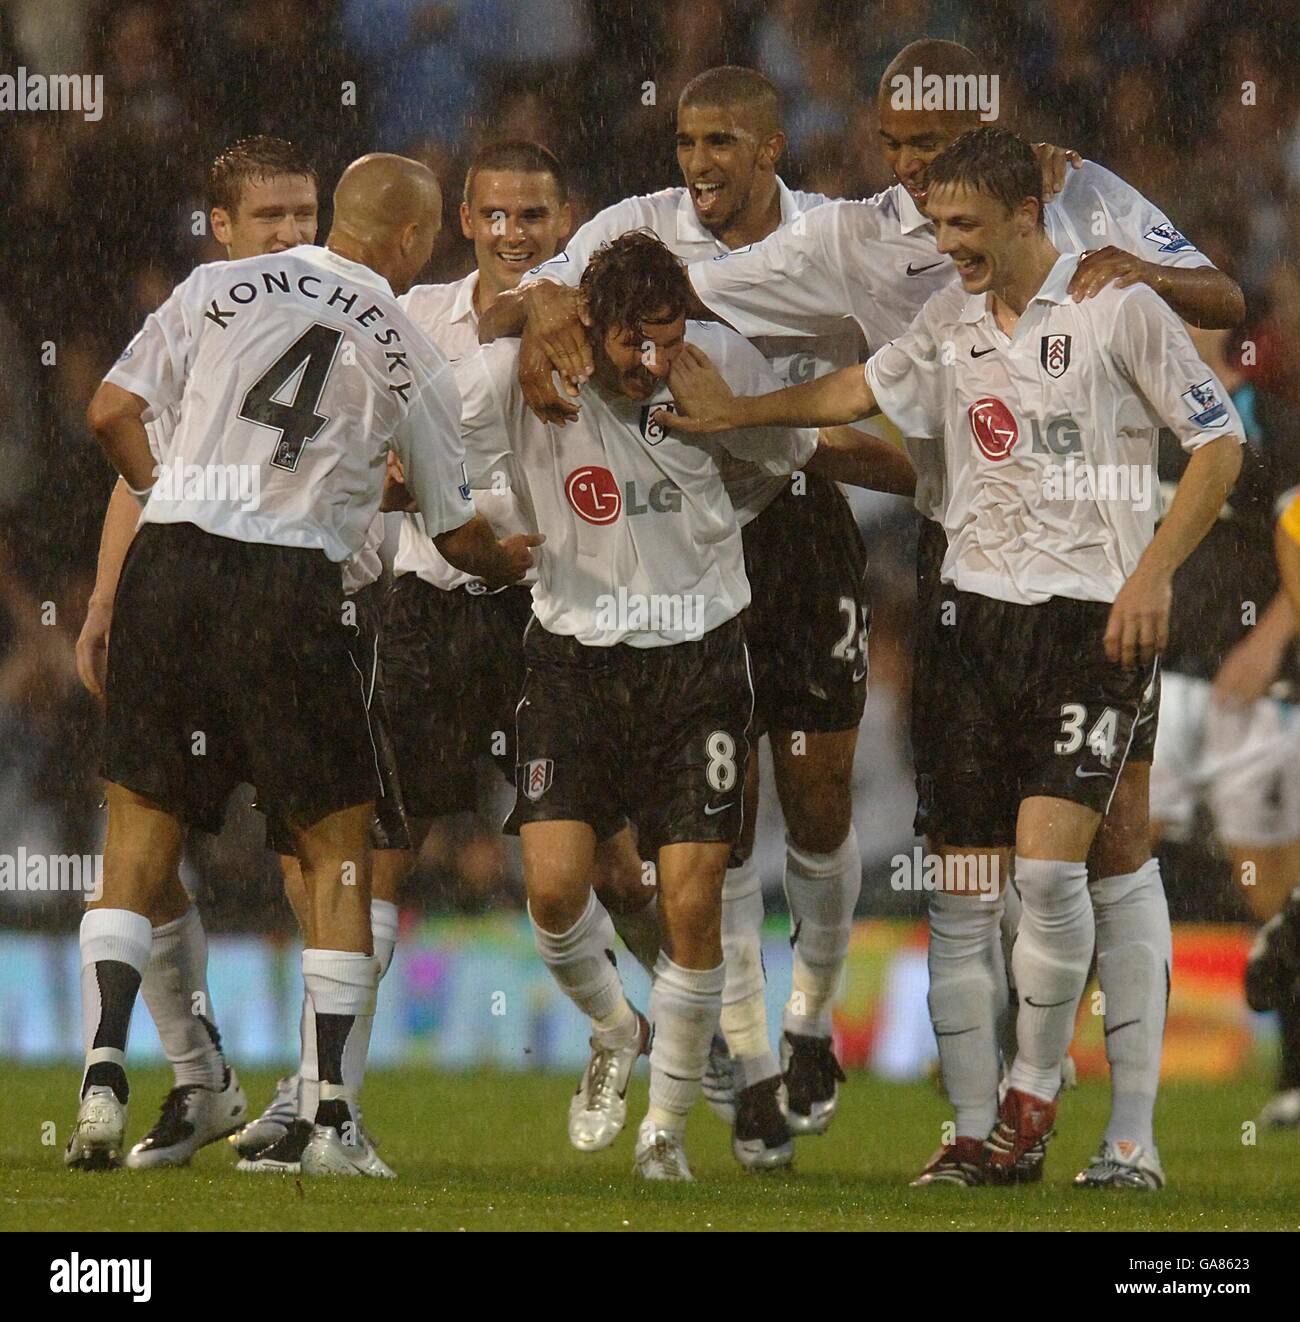 Soccer - Barclays Premier League - Fulham v Bolton Wanderers - Craven Cottage. Fulham's Alexey Smertin (no.8) is congratulated on scoring his sides second goal of the game. Stock Photo